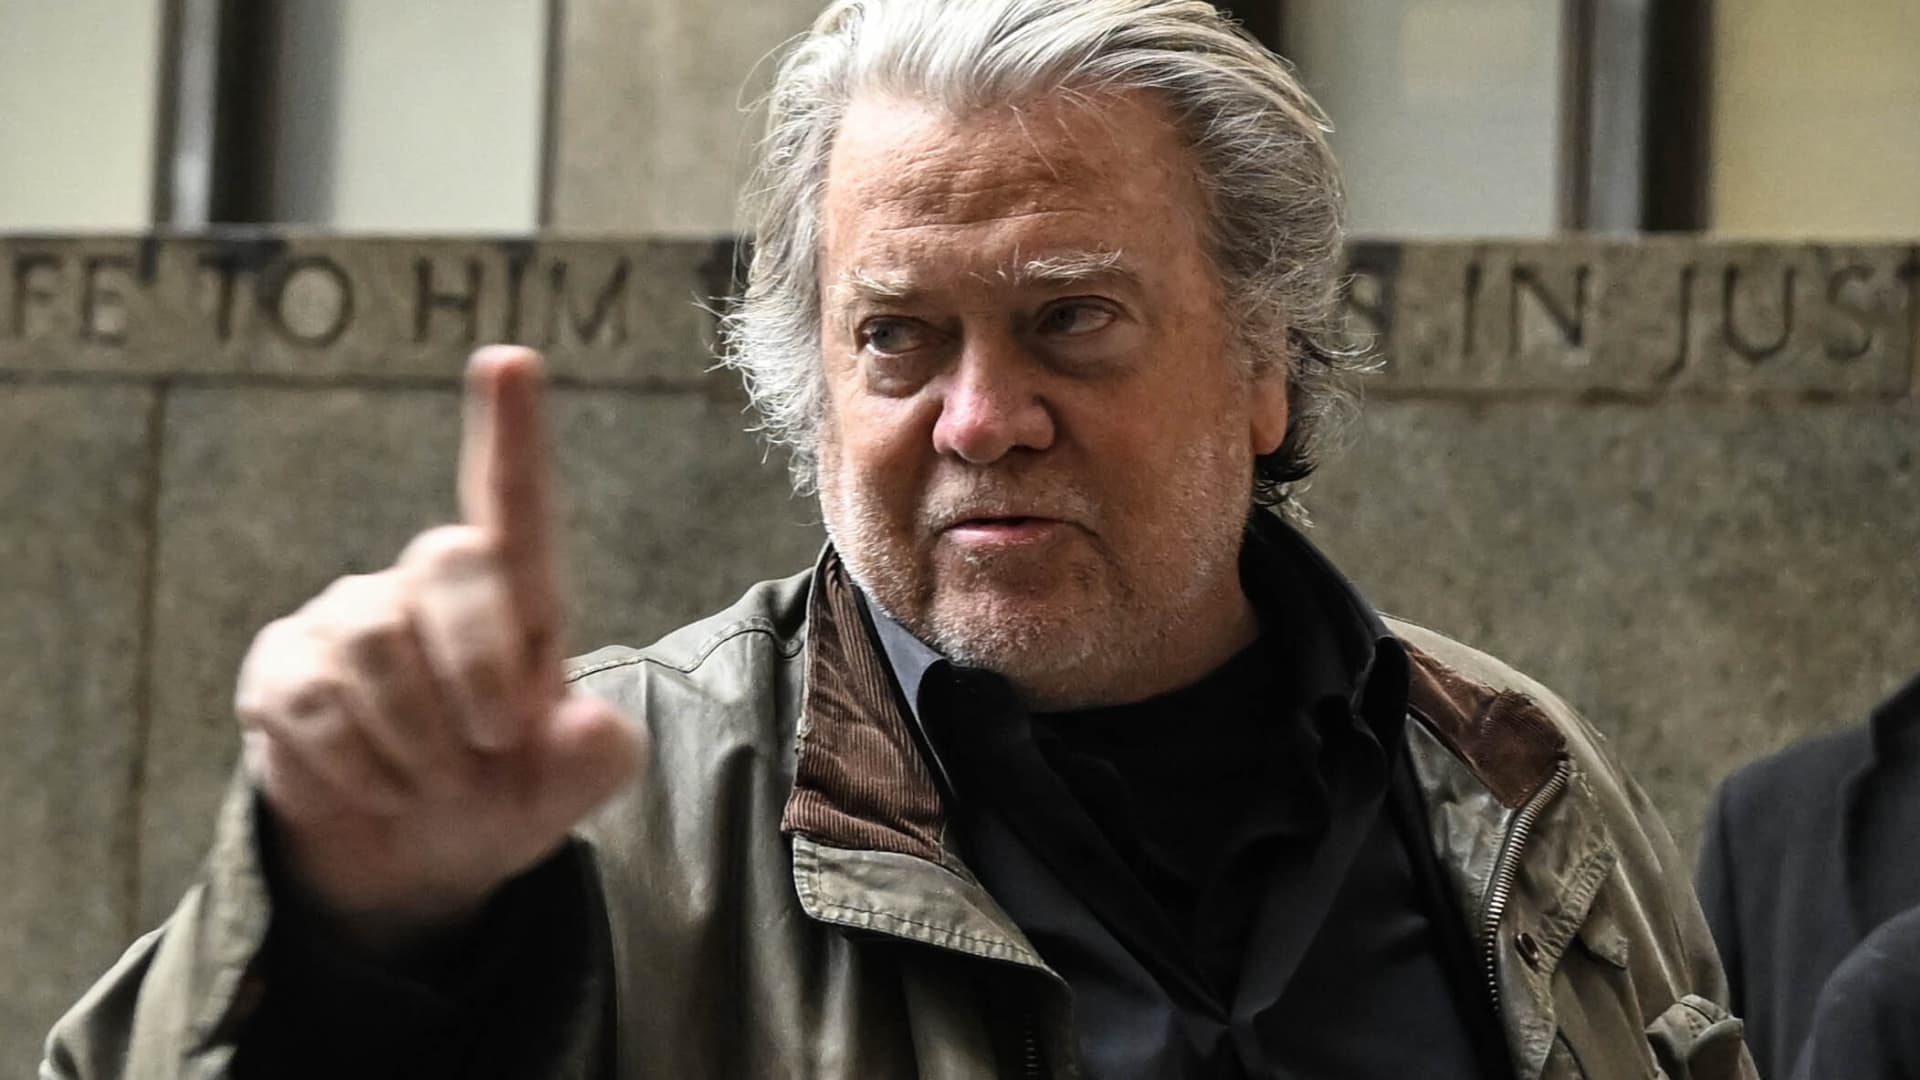 Prosecutors talk to judge to jail former Trump aide Steve Bannon following he loses enchantment